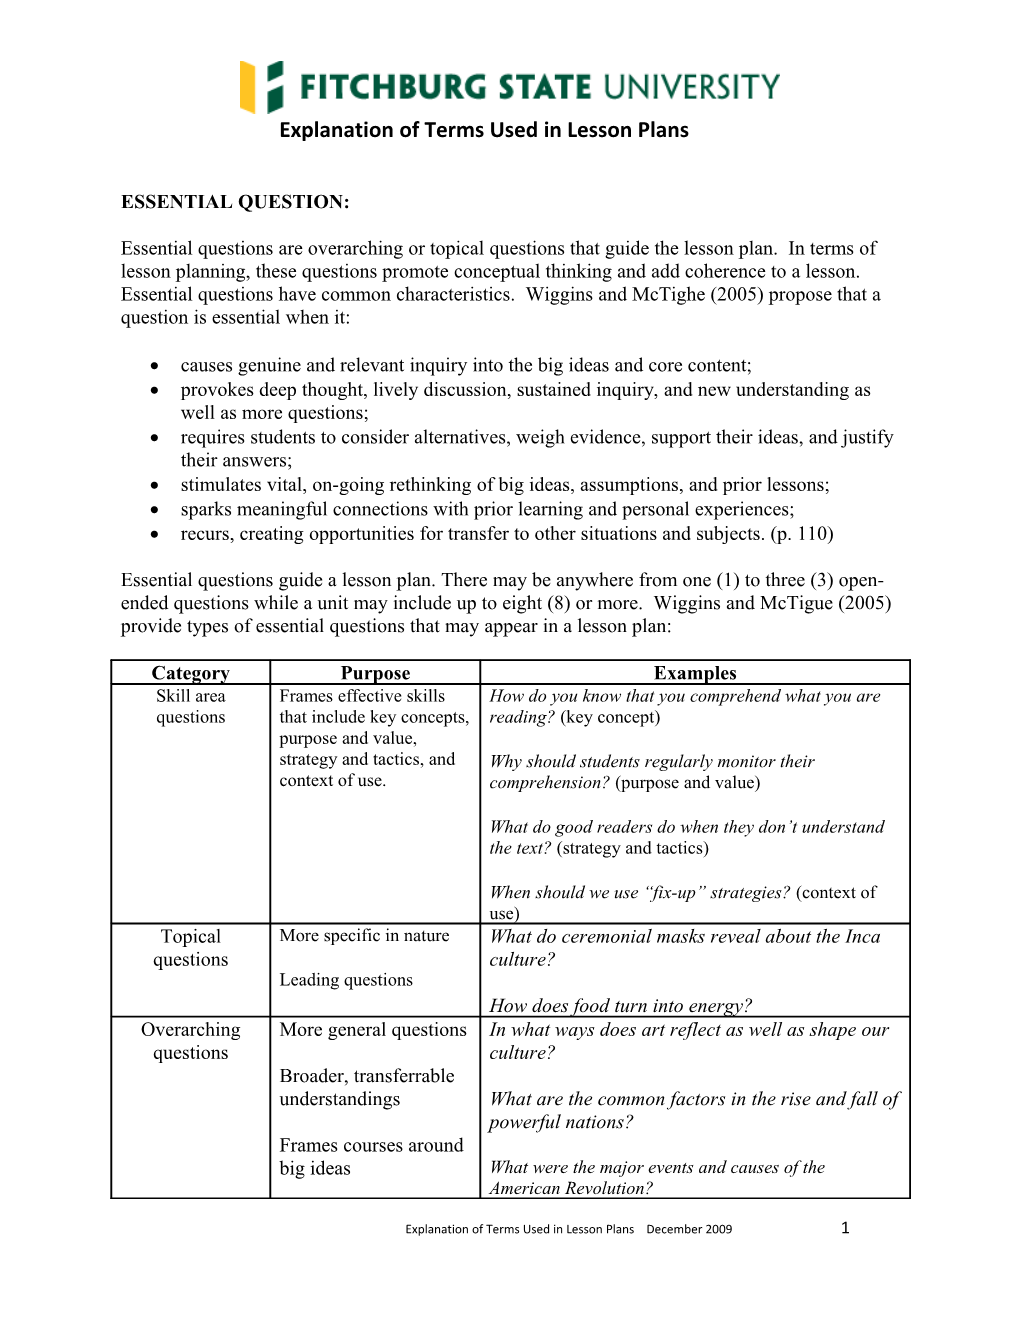 Explanation of Terms Used in Lesson Plans